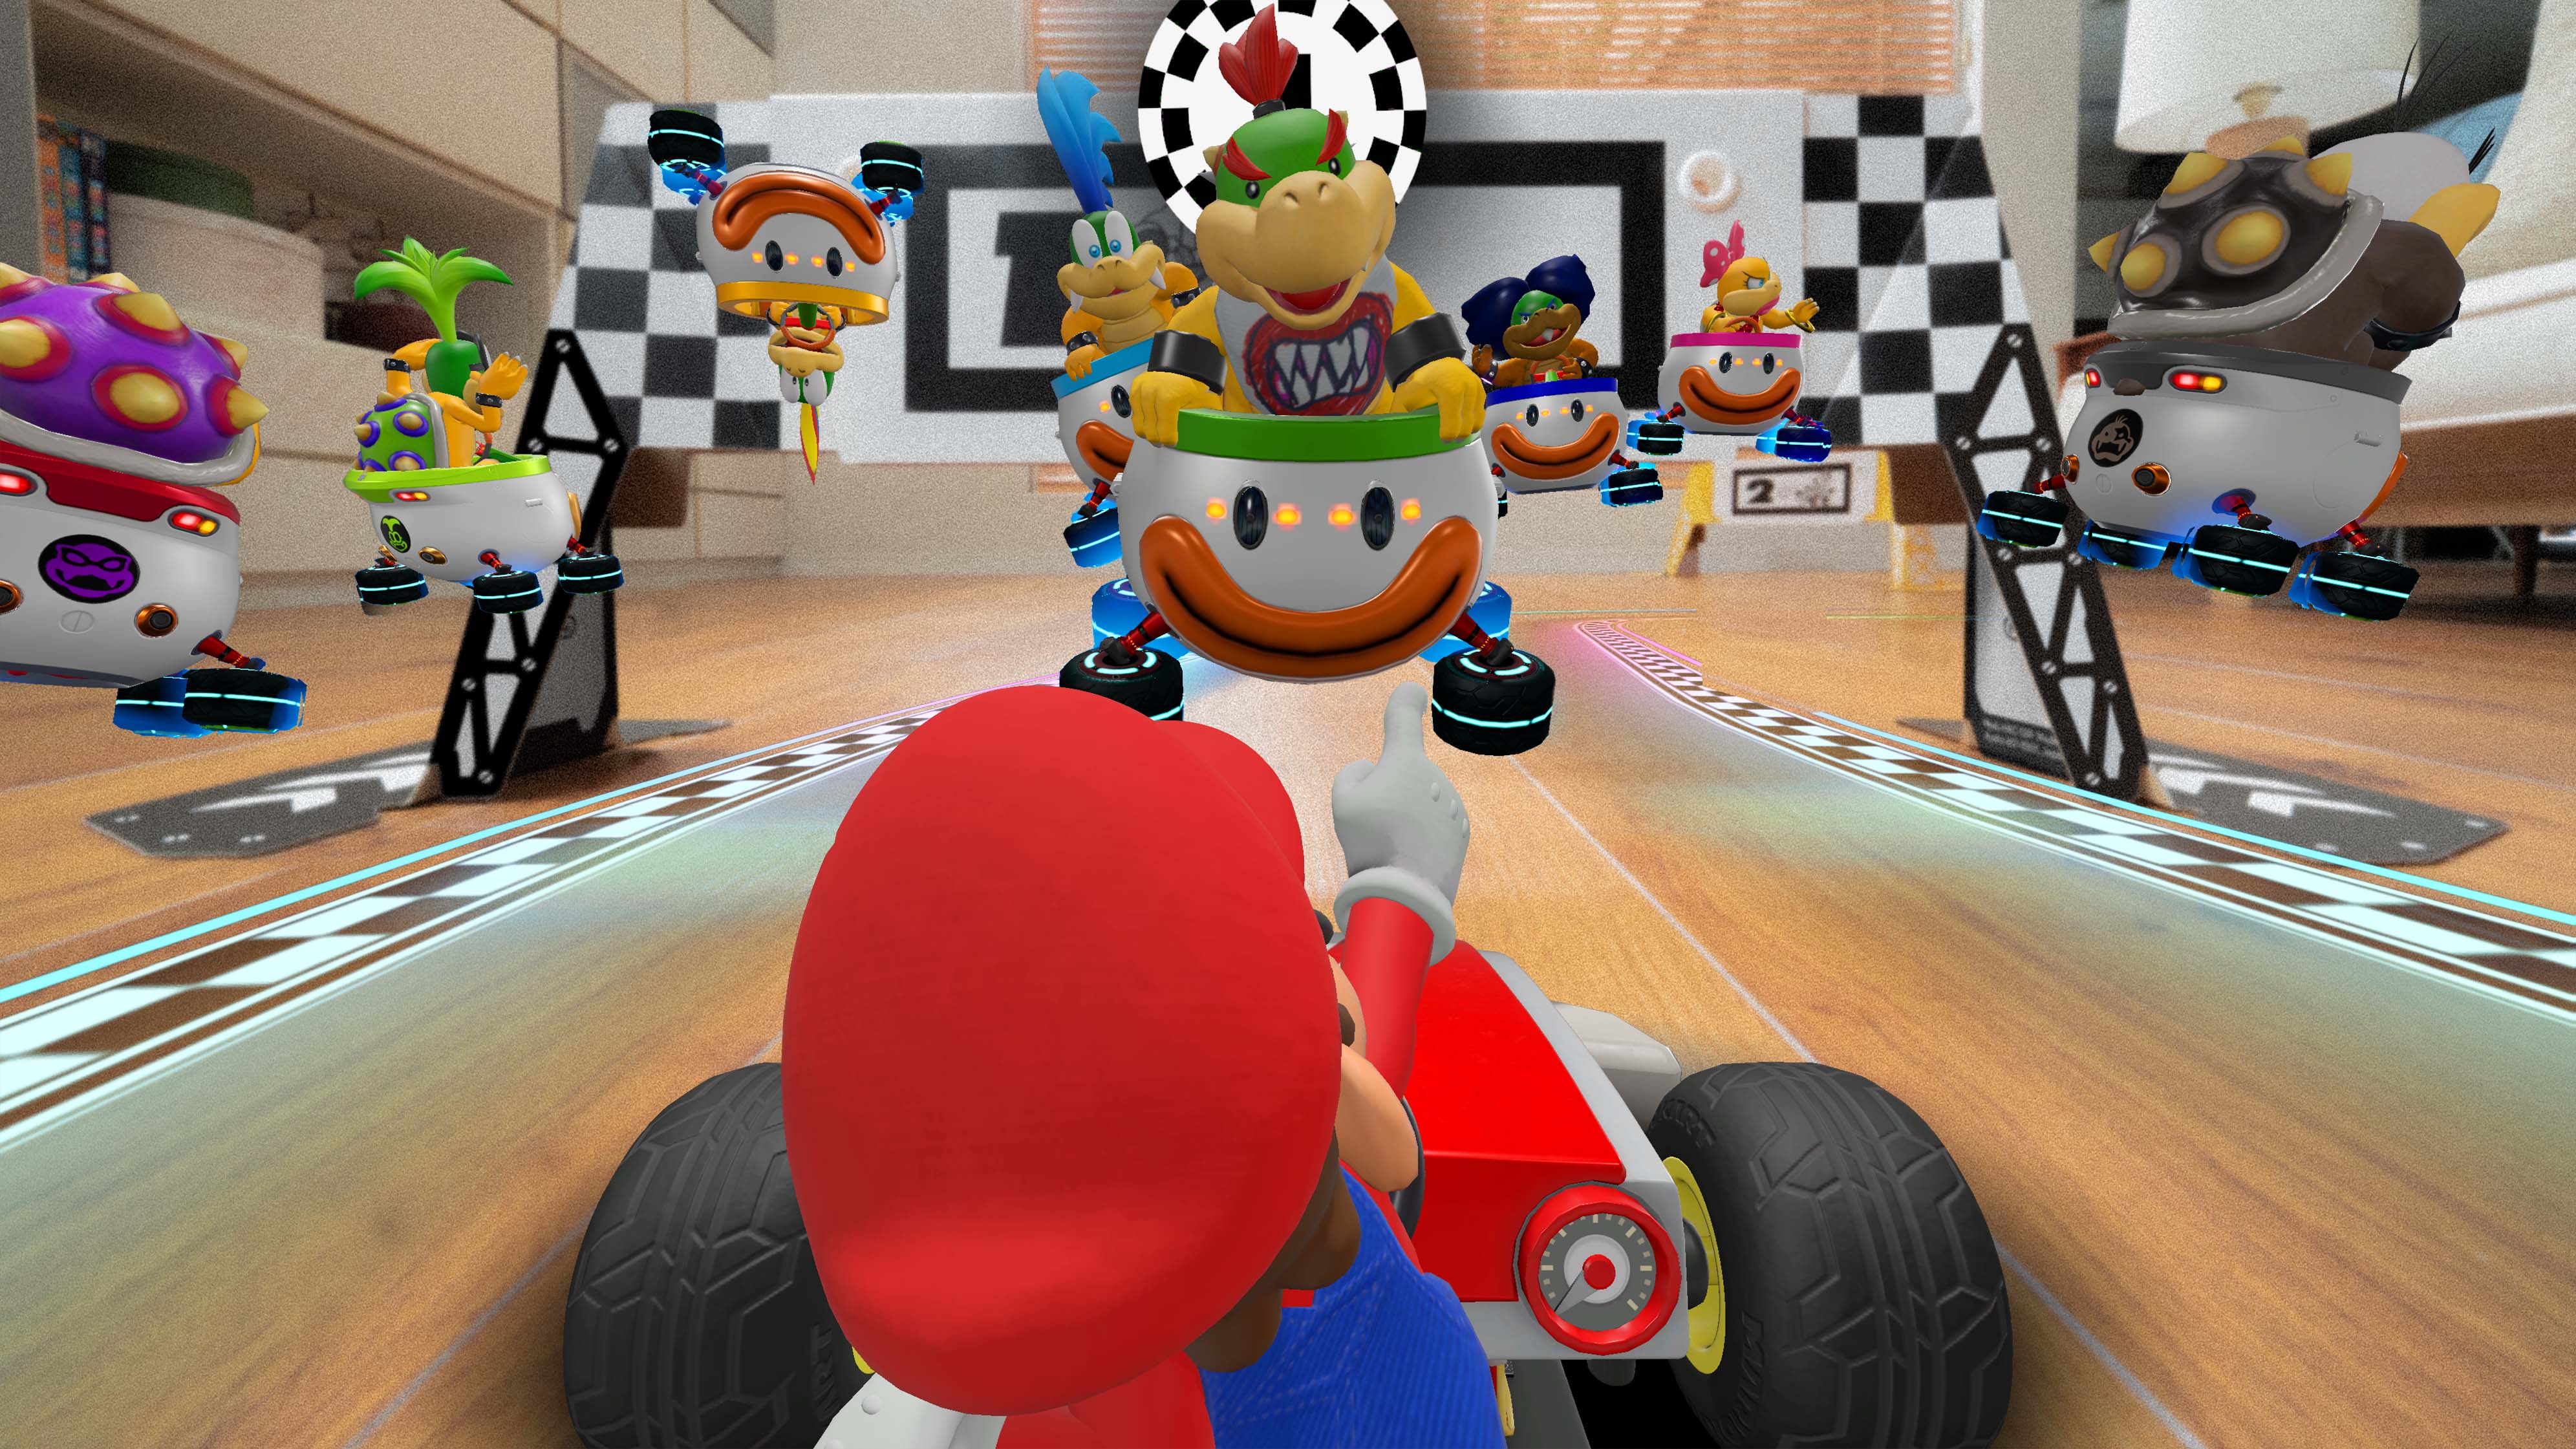 Image for Mario Kart Live is a pricey gimmick - but it's filled with that irresistible Nintendo magic